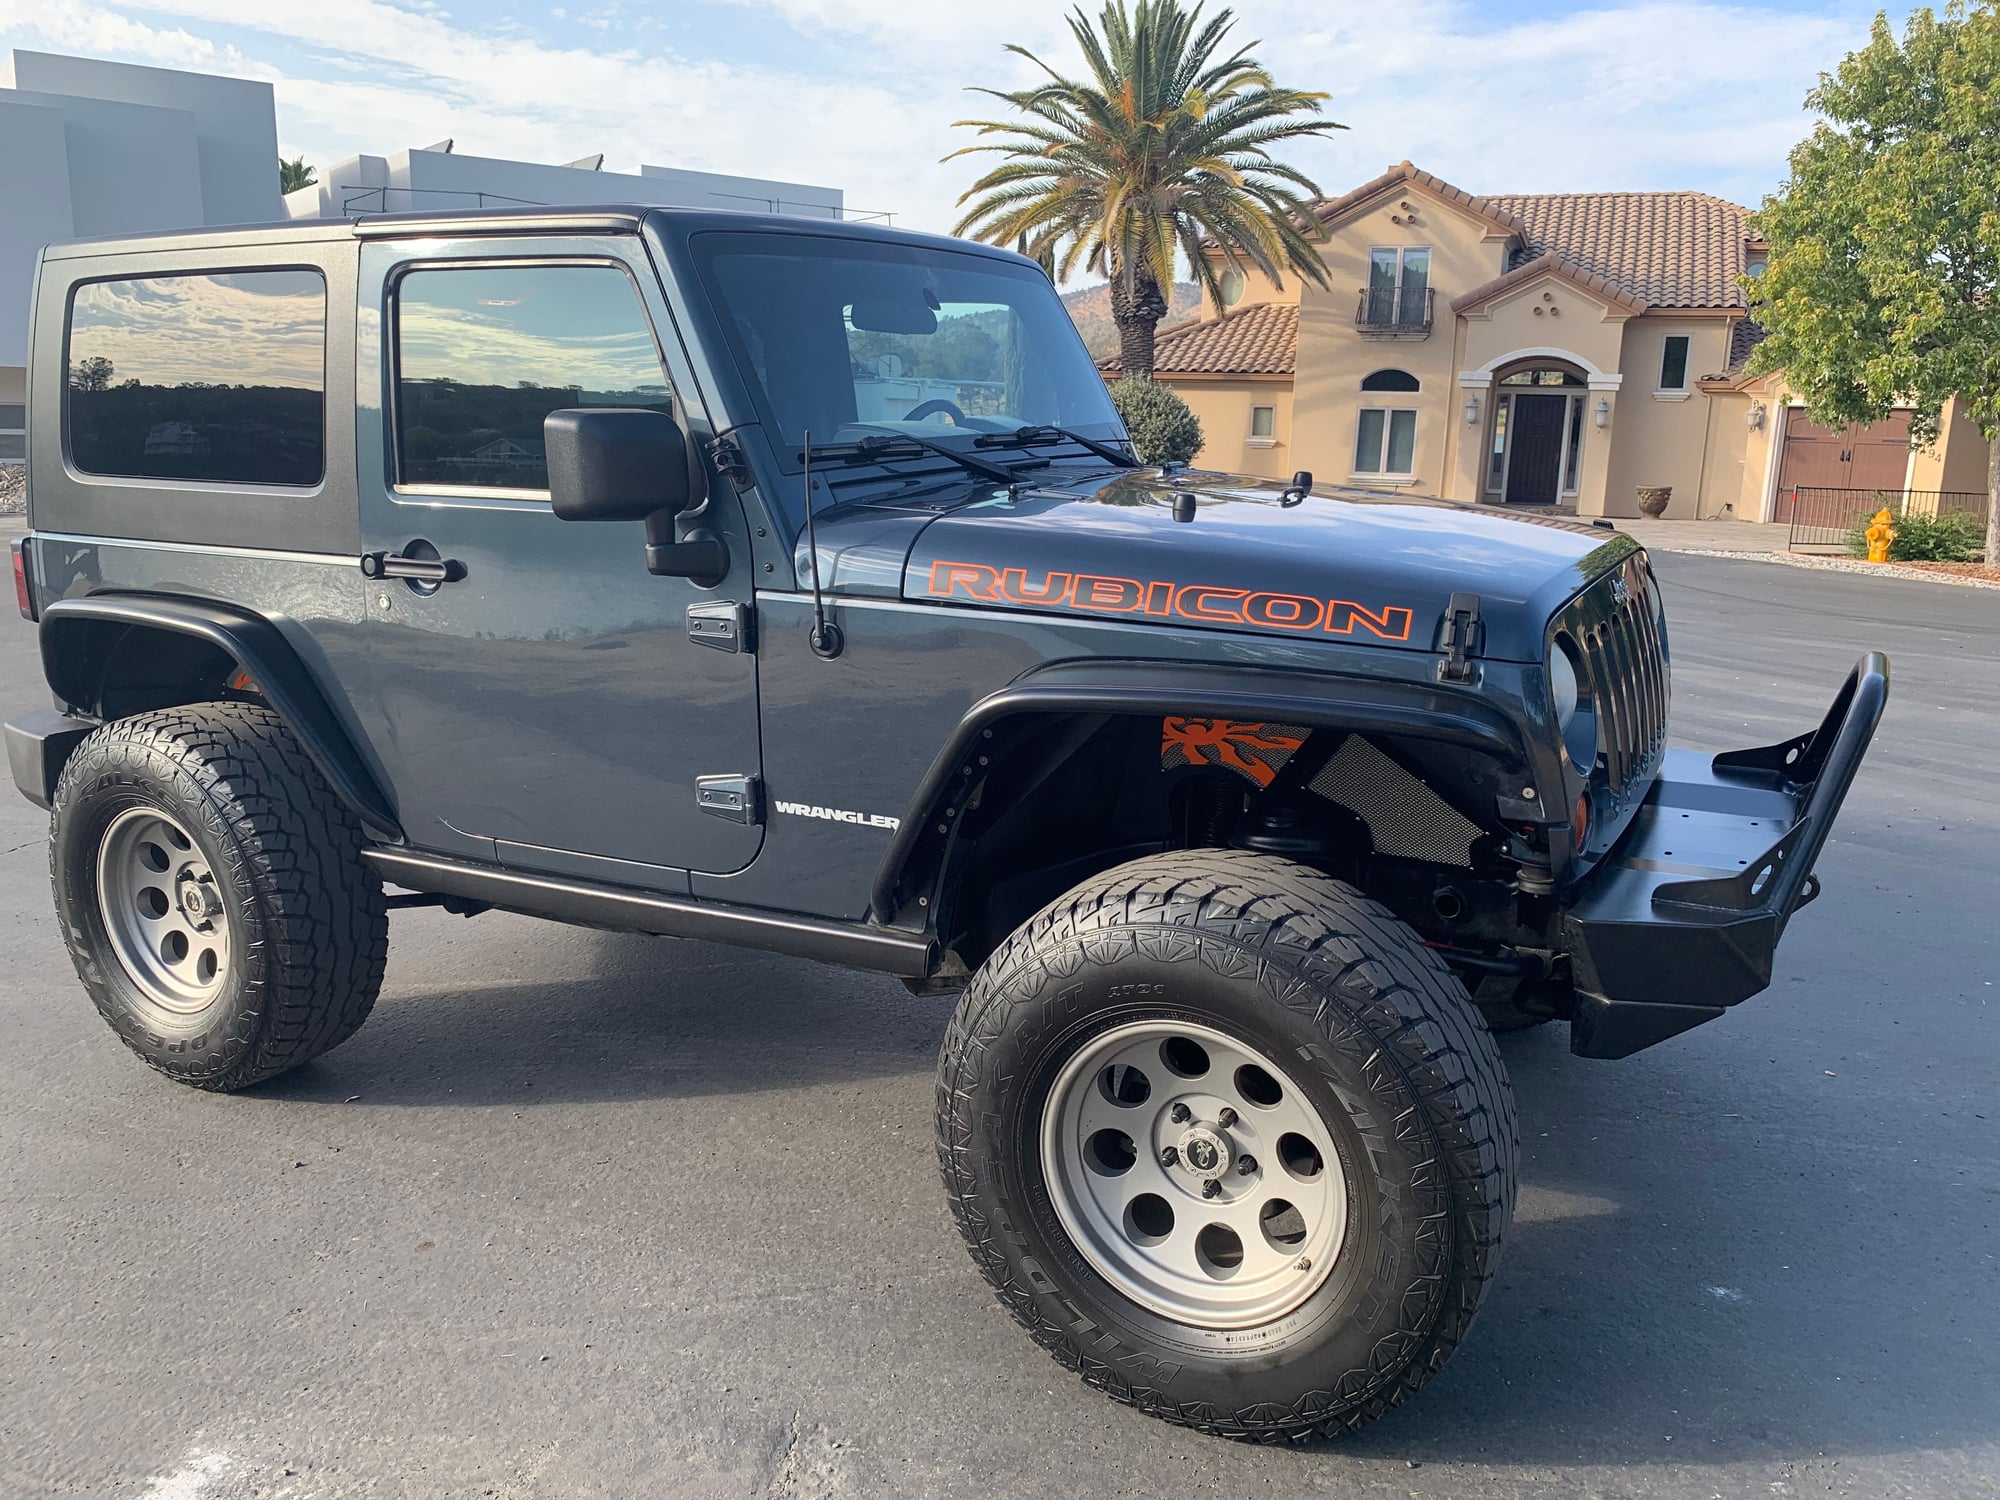 2008 Jeep Wrangler Rubicon LOW MILES. Poison Sypder!  - The  top destination for Jeep JK and JL Wrangler news, rumors, and discussion